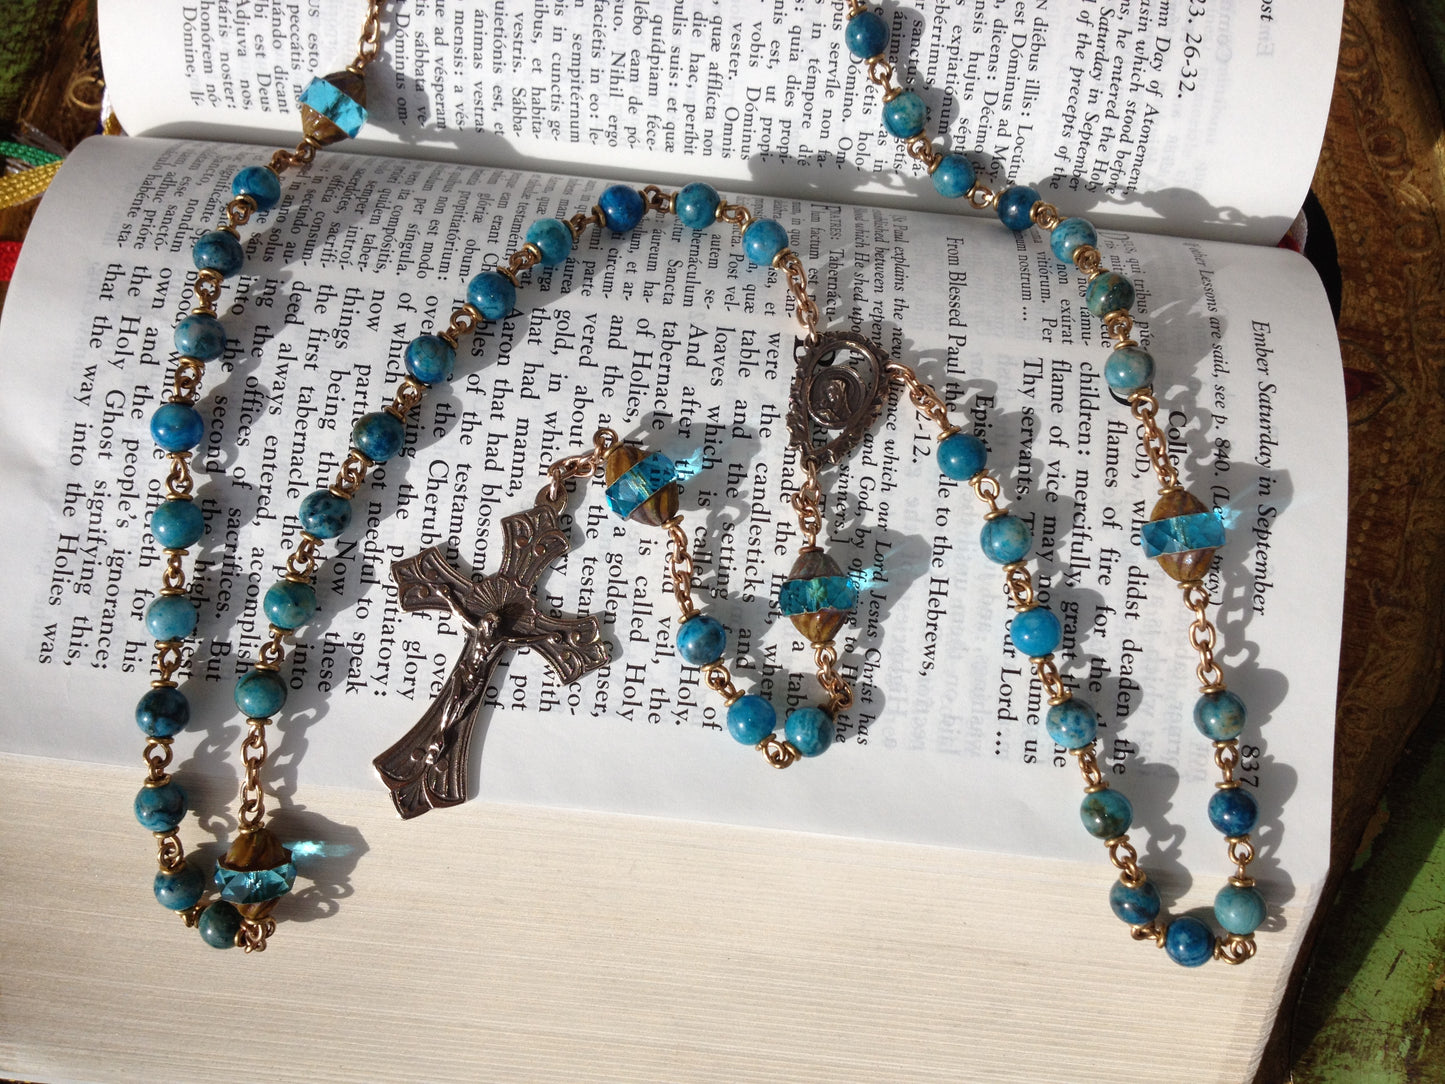 Heirloom Rosary, Blue Crazy Lace Gemstone with Czech glass beads